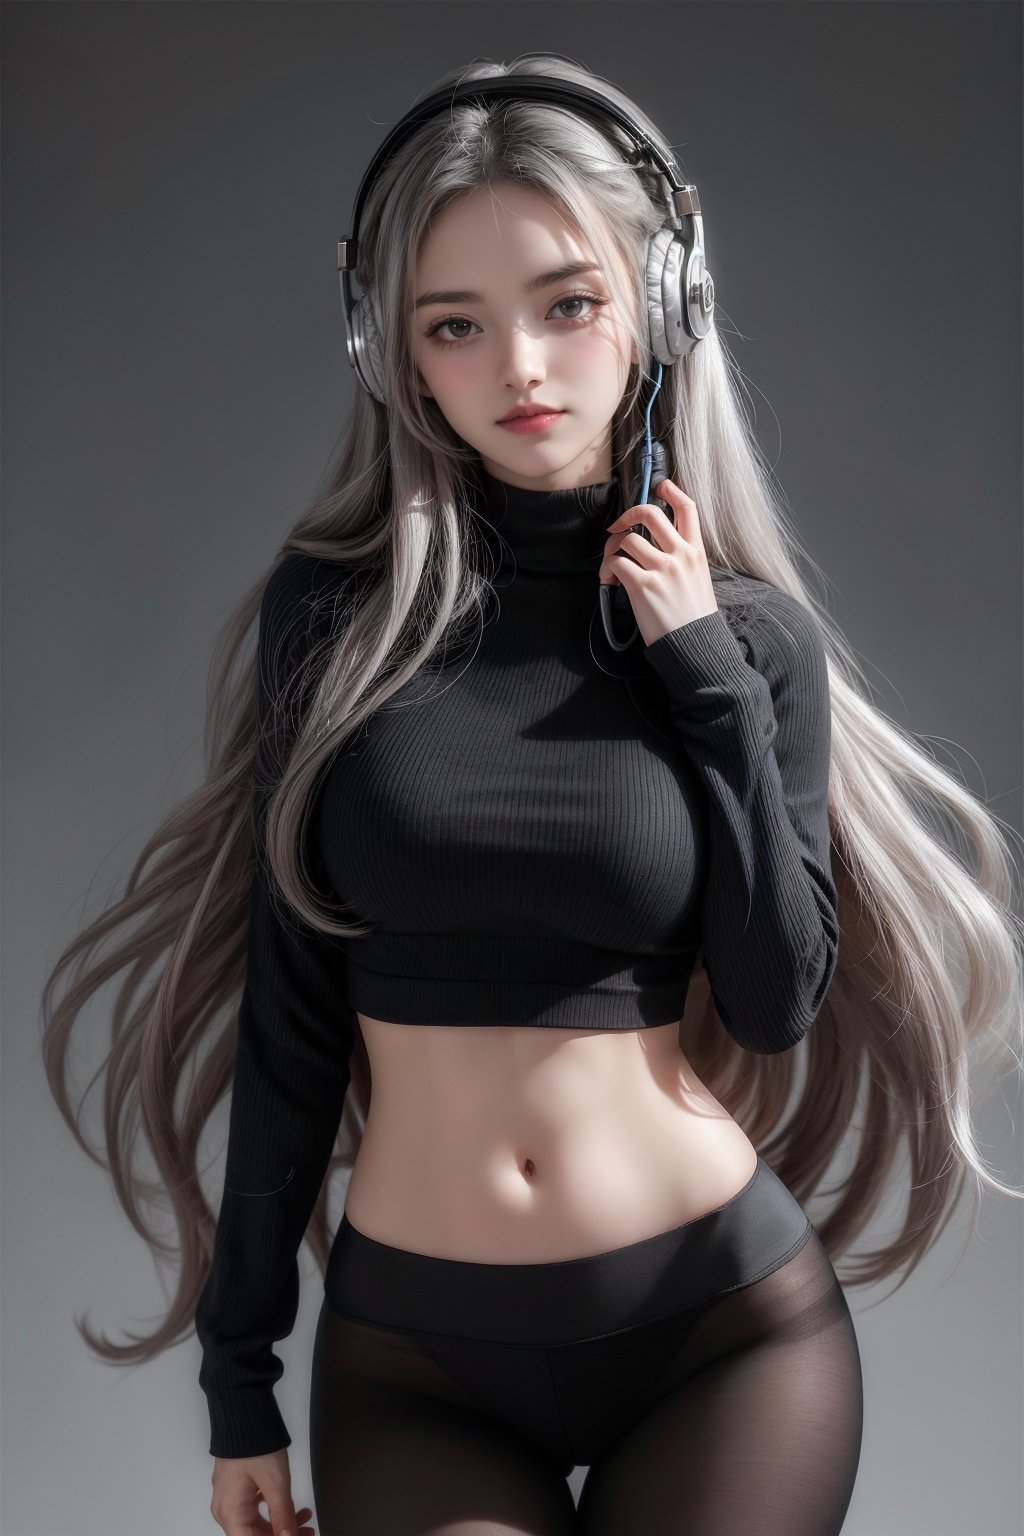 warm light room Beautiful woman with silver long hair against a grey background.over-the-ear headphones Smile,black tights top,Girl